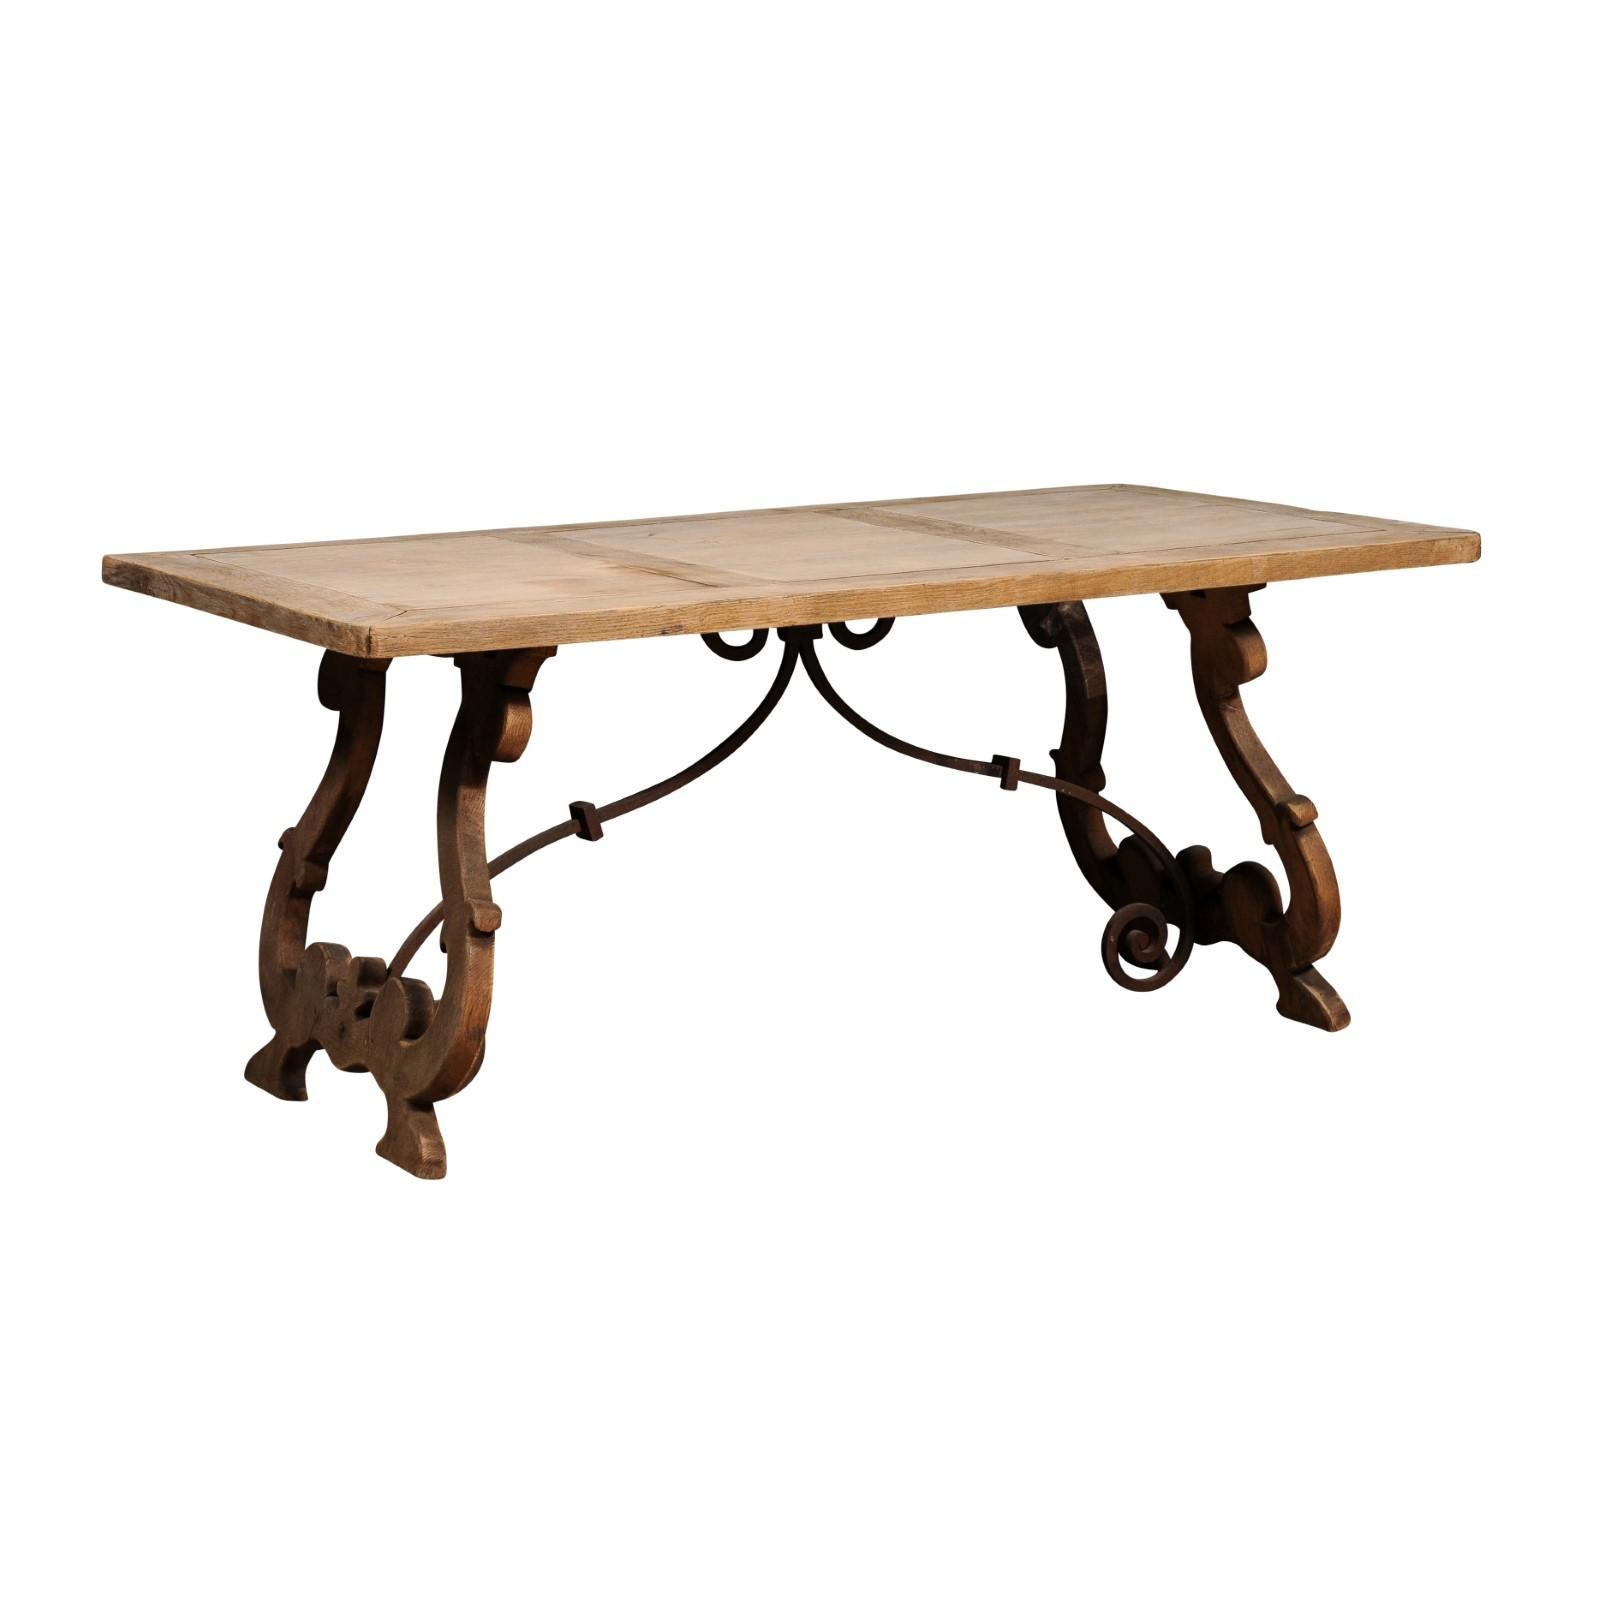 A Spanish Baroque style bleached oak Fratino table from circa 1900 with carved lyre-shaped legs and iron stretchers. Step back in time and embrace the captivating beauty of this Spanish Baroque style bleached oak Fratino table from circa 1900. Its